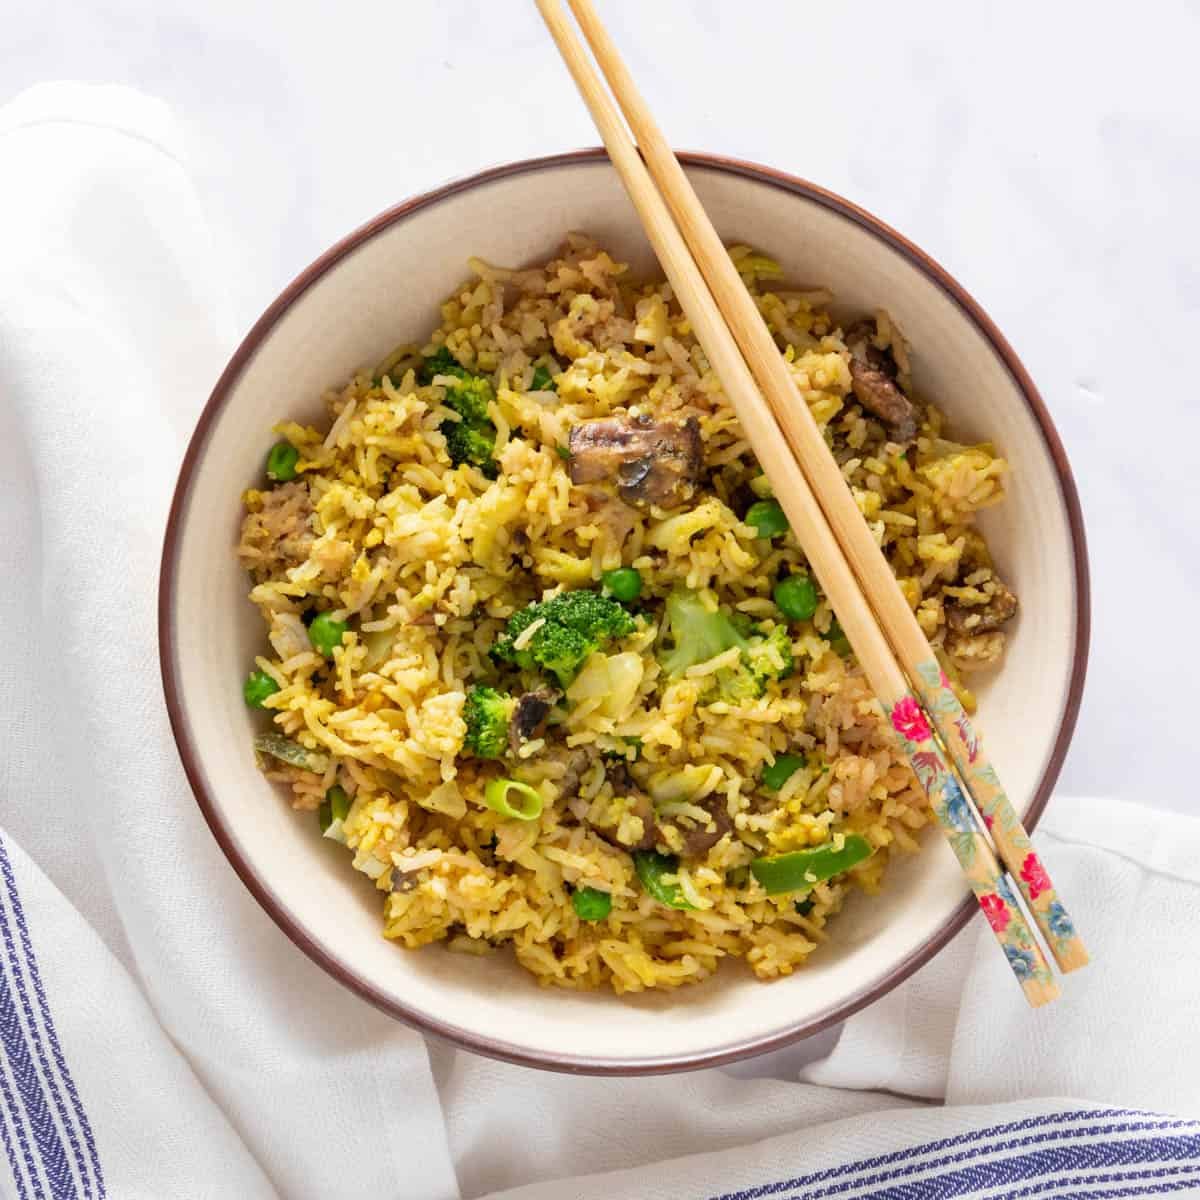 Bowl of vegetarian fried rice, with napkin and chopsticks on the side